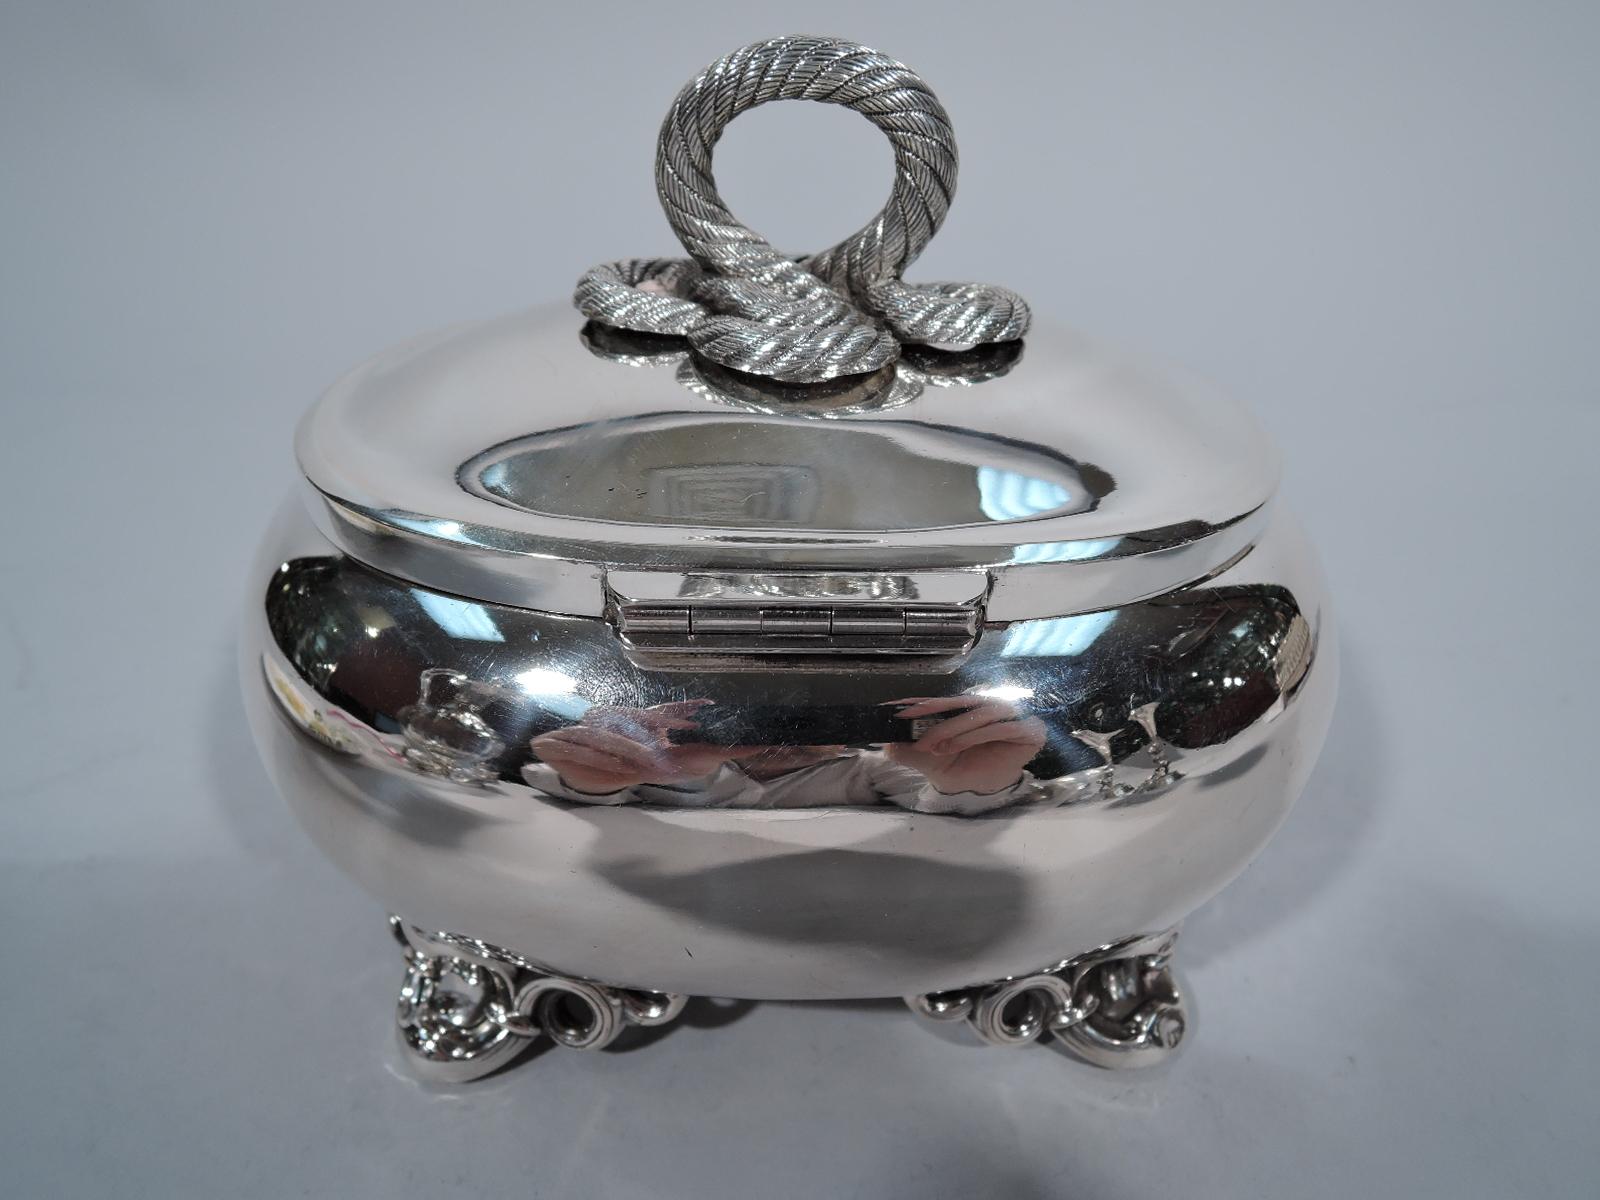 European 750 silver box, ca 1880. Ovoid with 4 scrolled supports. Cover hinged with floral tab and cast rope finial. Interior gilt. Marked. Weight: 11 troy ounces.